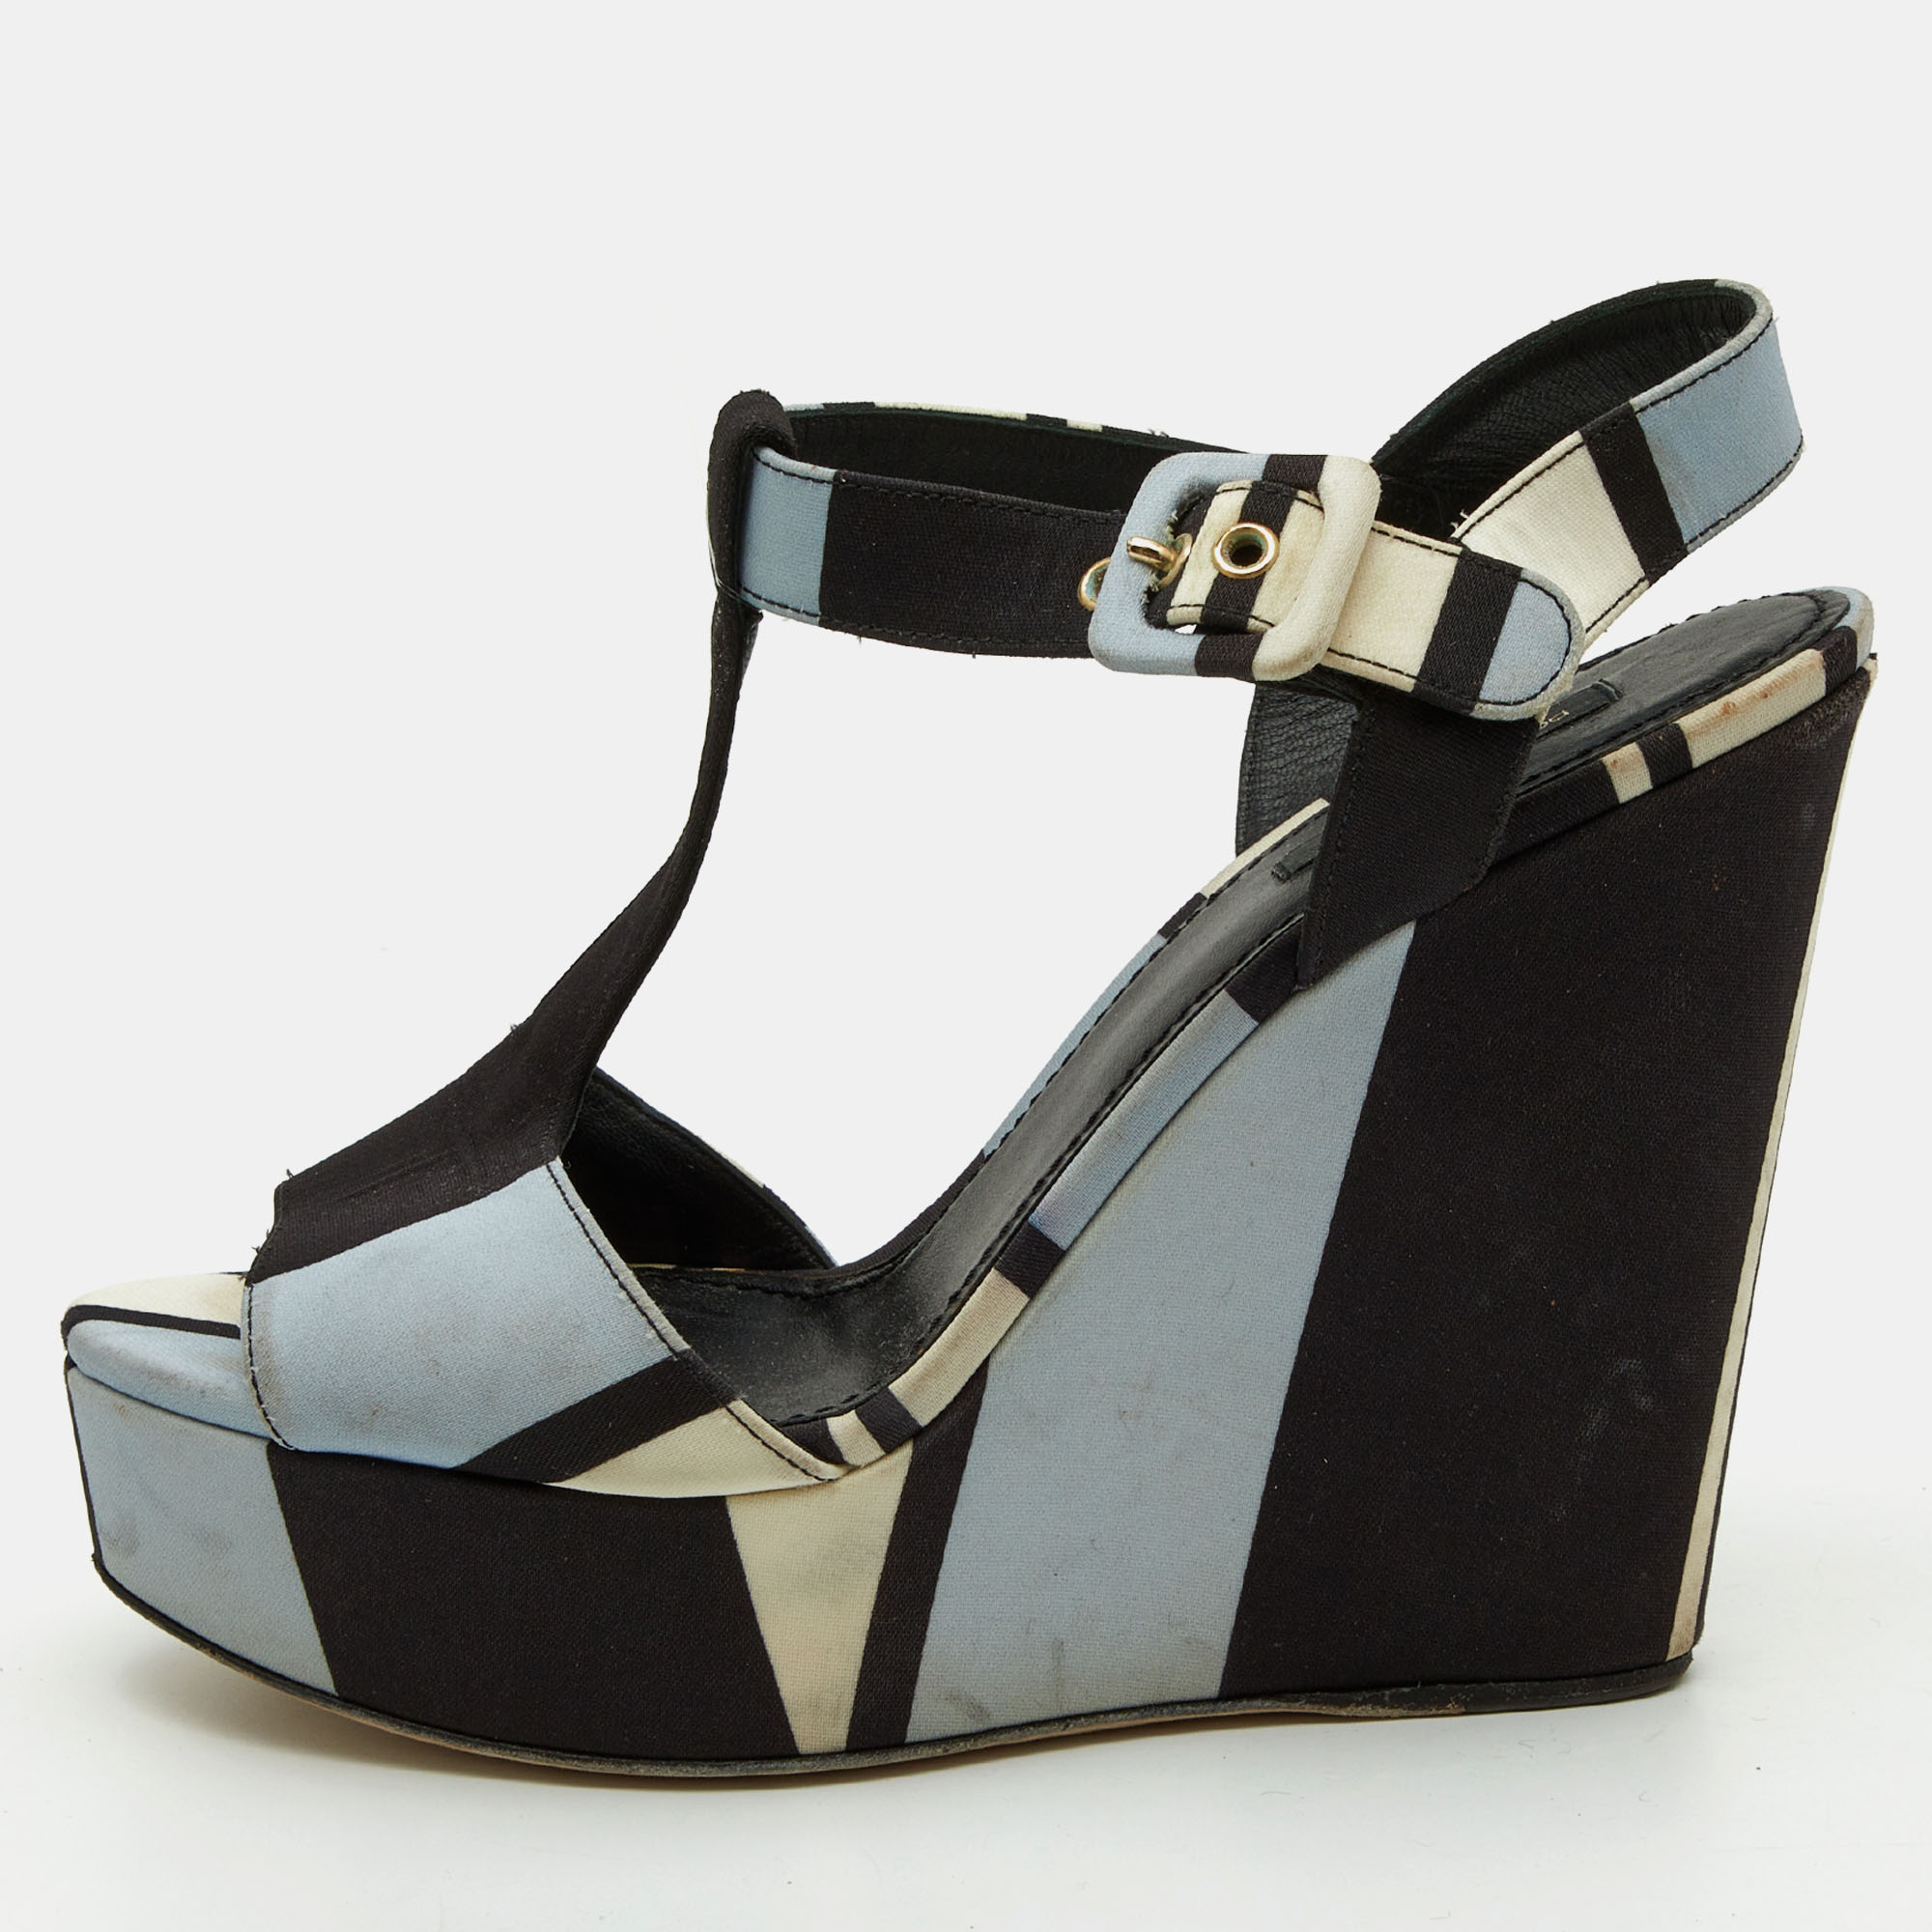 Dolce and Gabbanas Tri Color Printed Fabric T Strap Wedge Sandals feature a vibrant unique print T strap design and comfortable wedge heel offering a blend of elegance and statement making style.